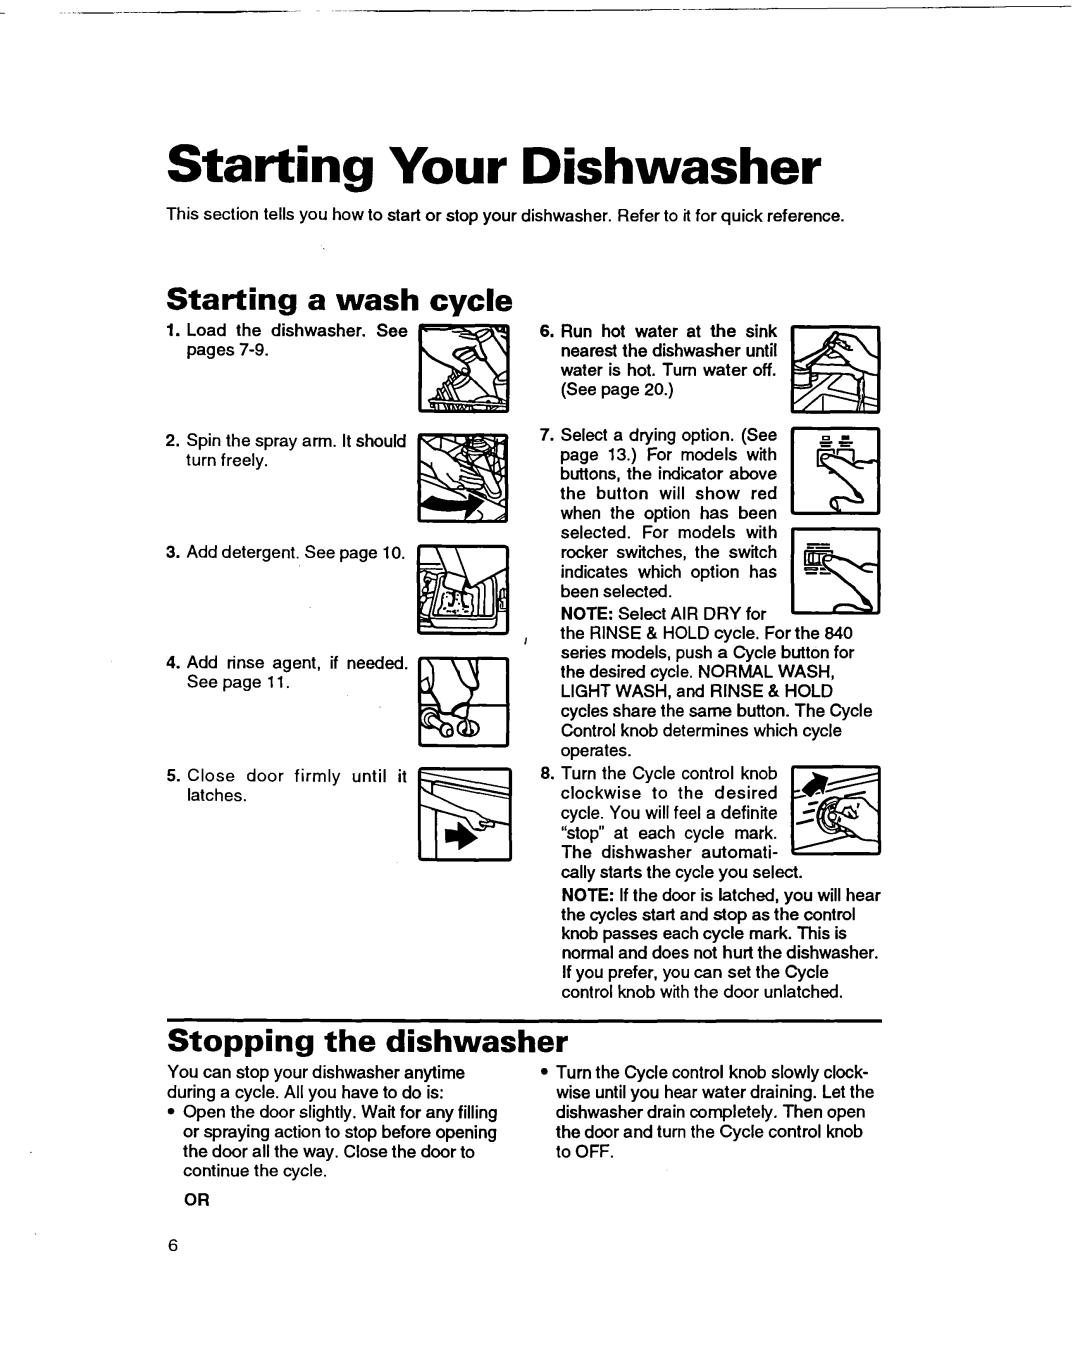 Whirlpool 400 warranty Starting Your Dishwasher, Starting a wash cycle, the dishwasher, Stopping 